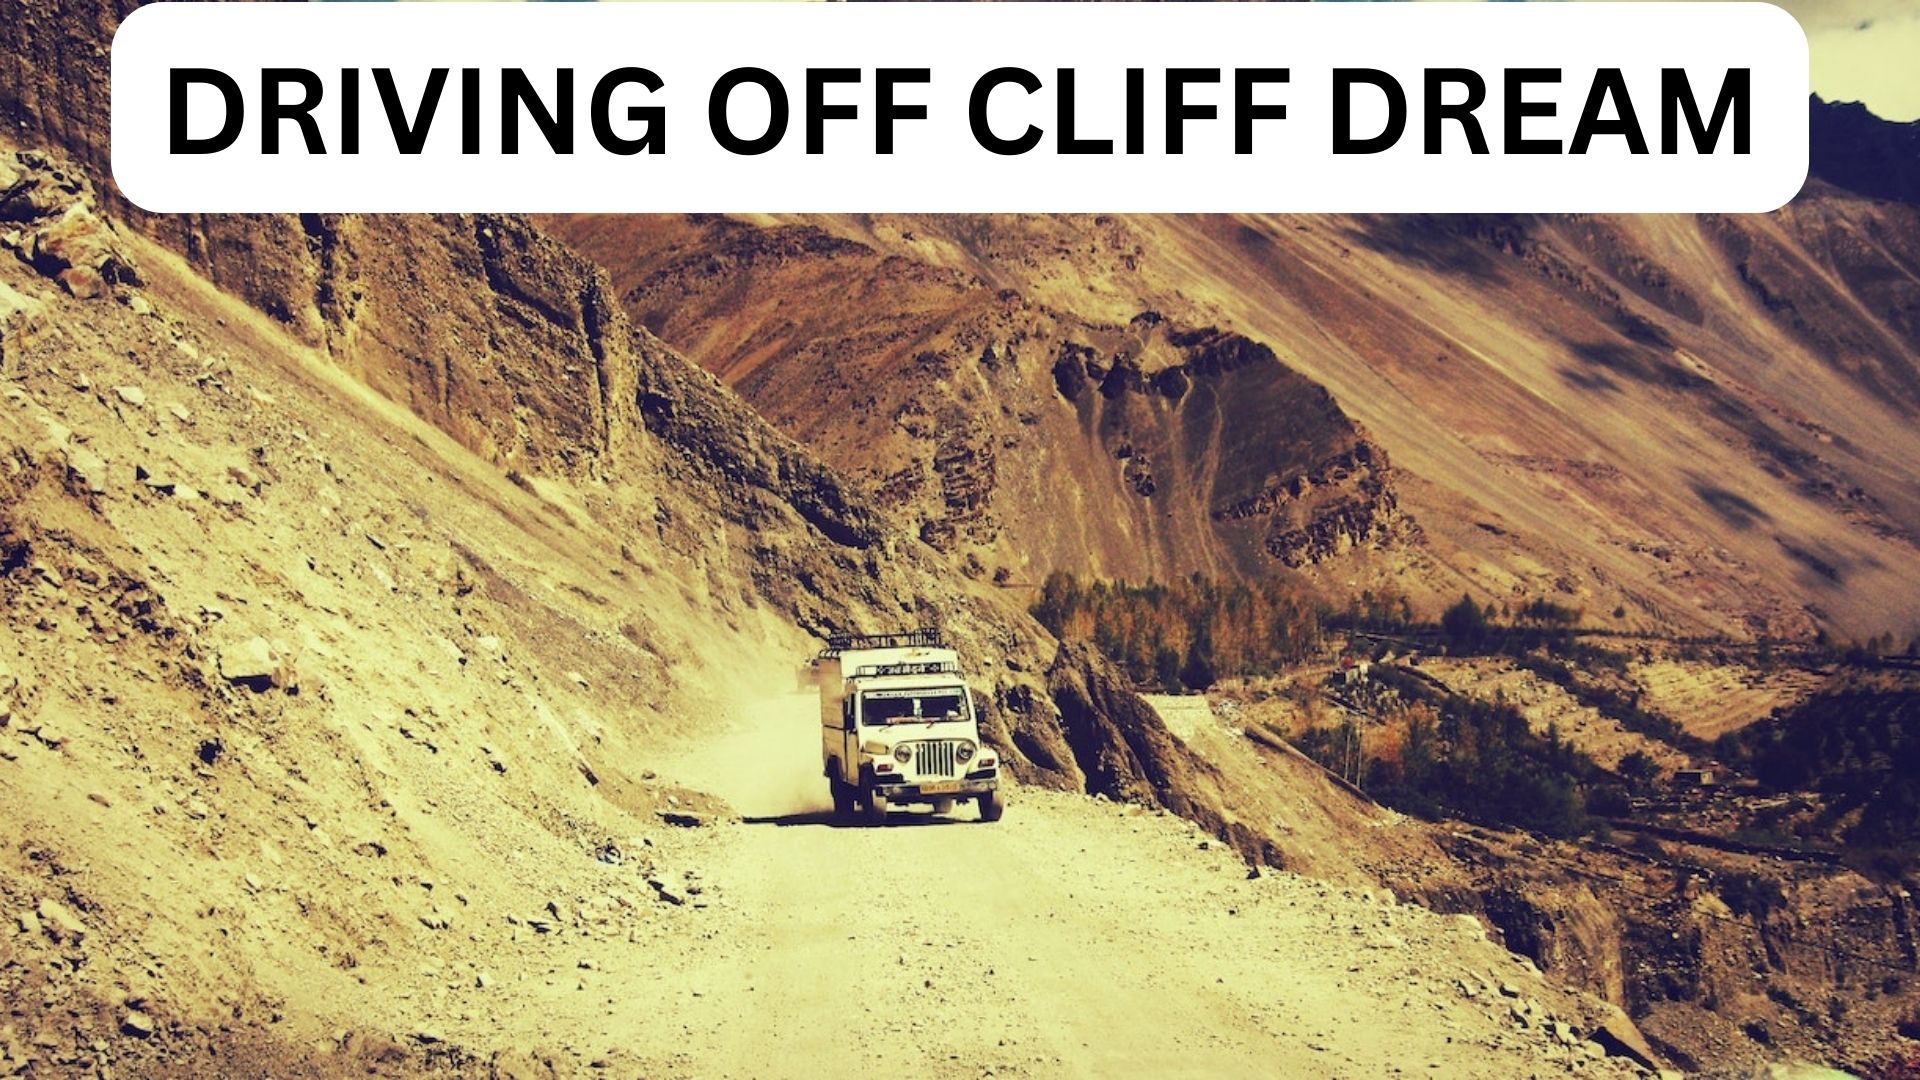 Driving Off Cliff Dream - A Warning From Your Subconscious